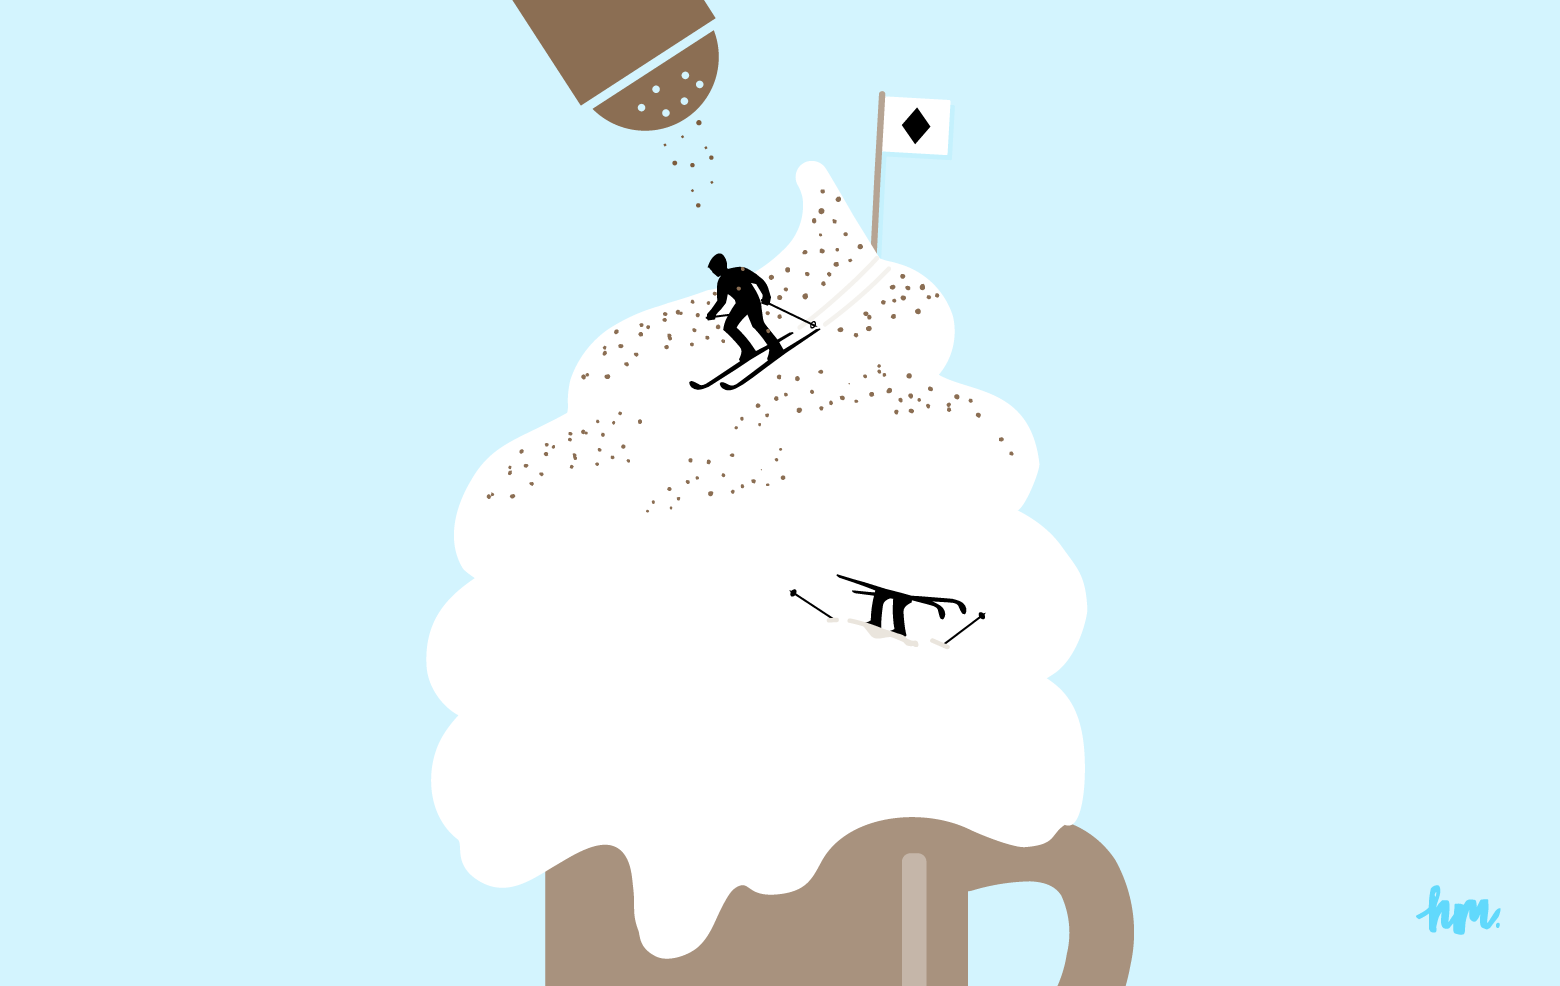 Illustration of black diamond skiers, skiing down a mountain of whipped cream in a mug.